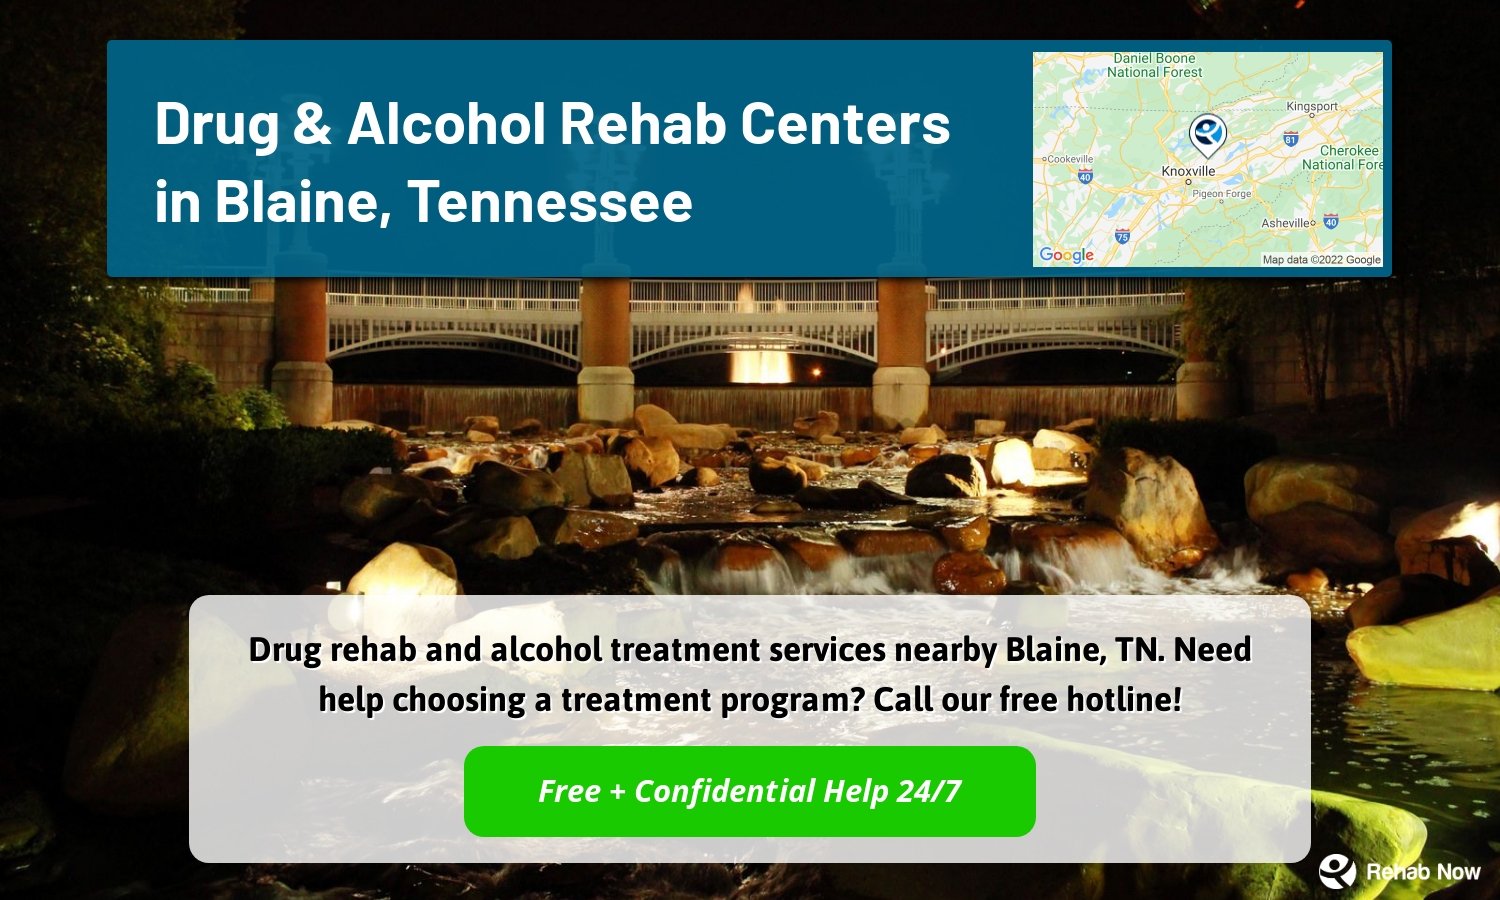 Drug rehab and alcohol treatment services nearby Blaine, TN. Need help choosing a treatment program? Call our free hotline!